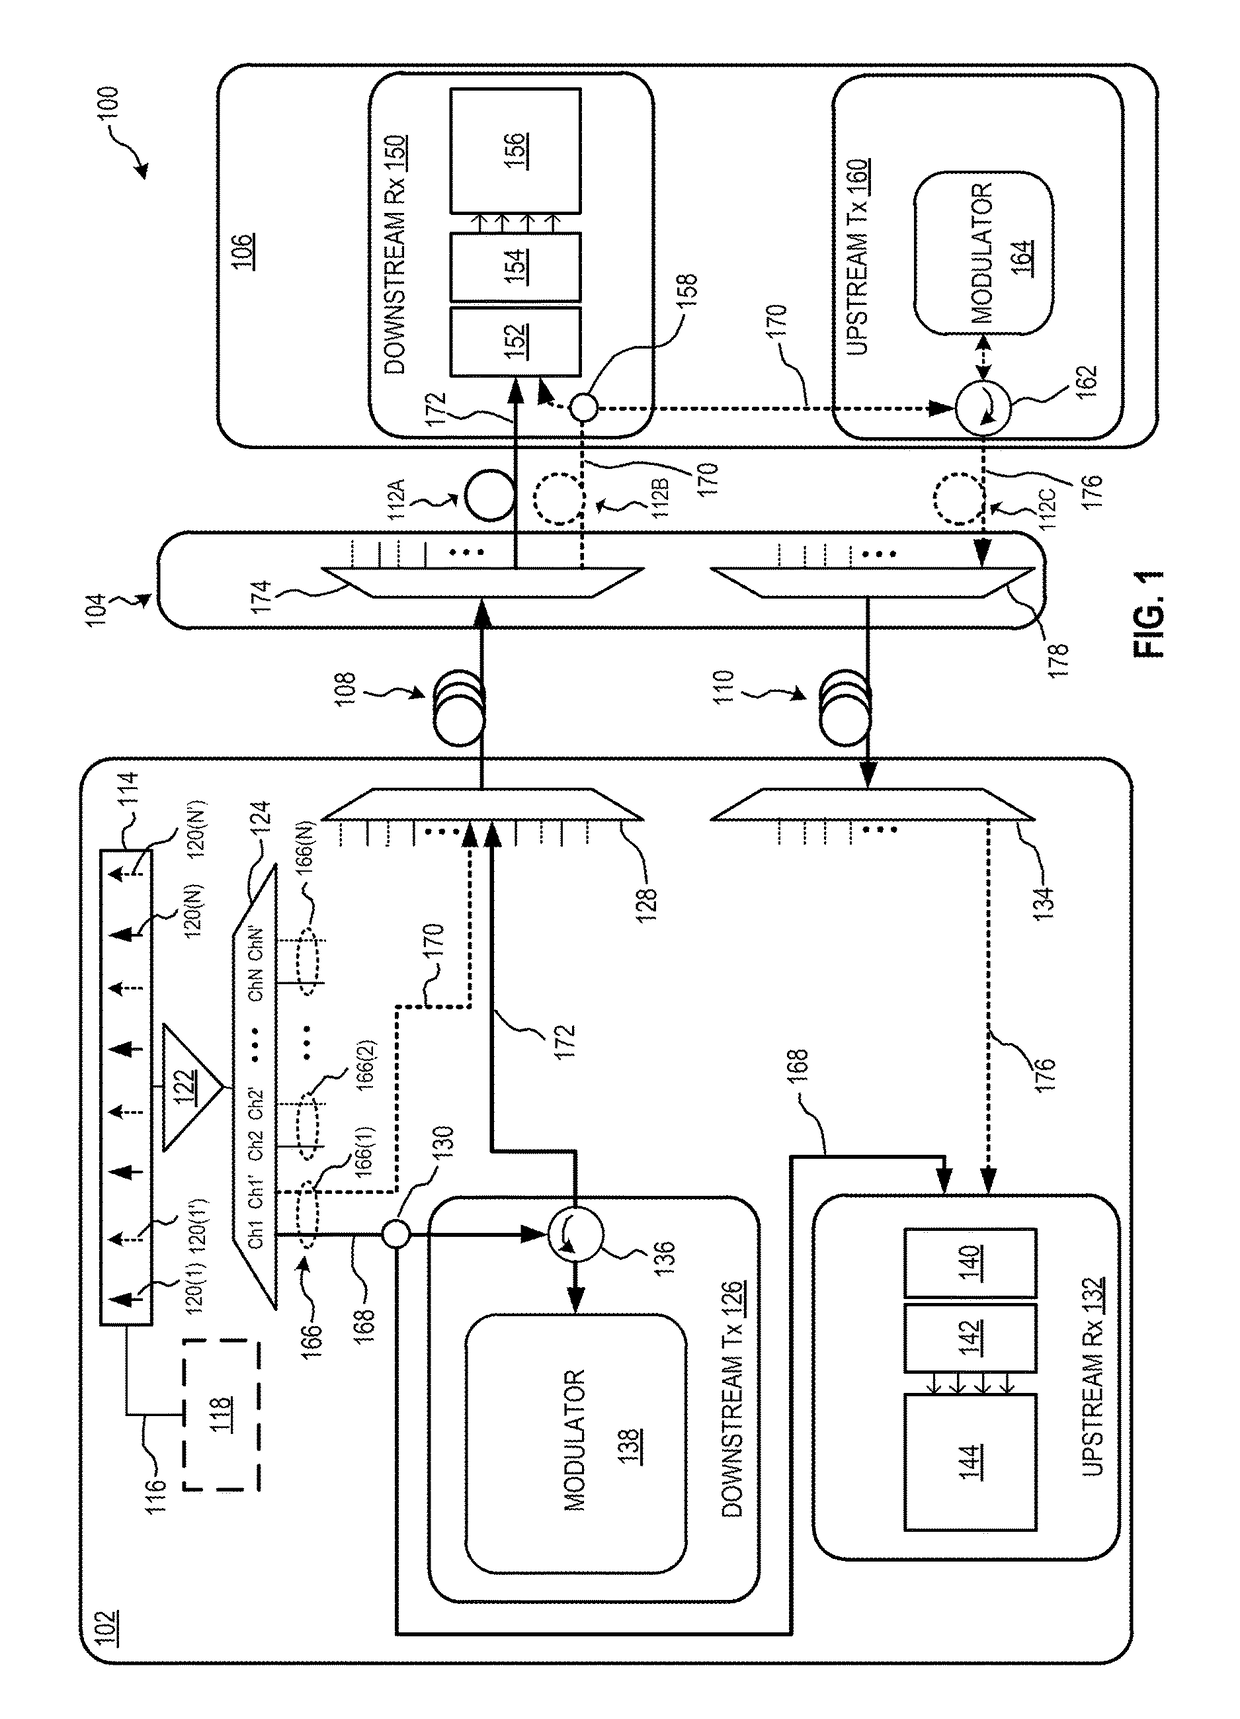 Fiber communication systems and methods